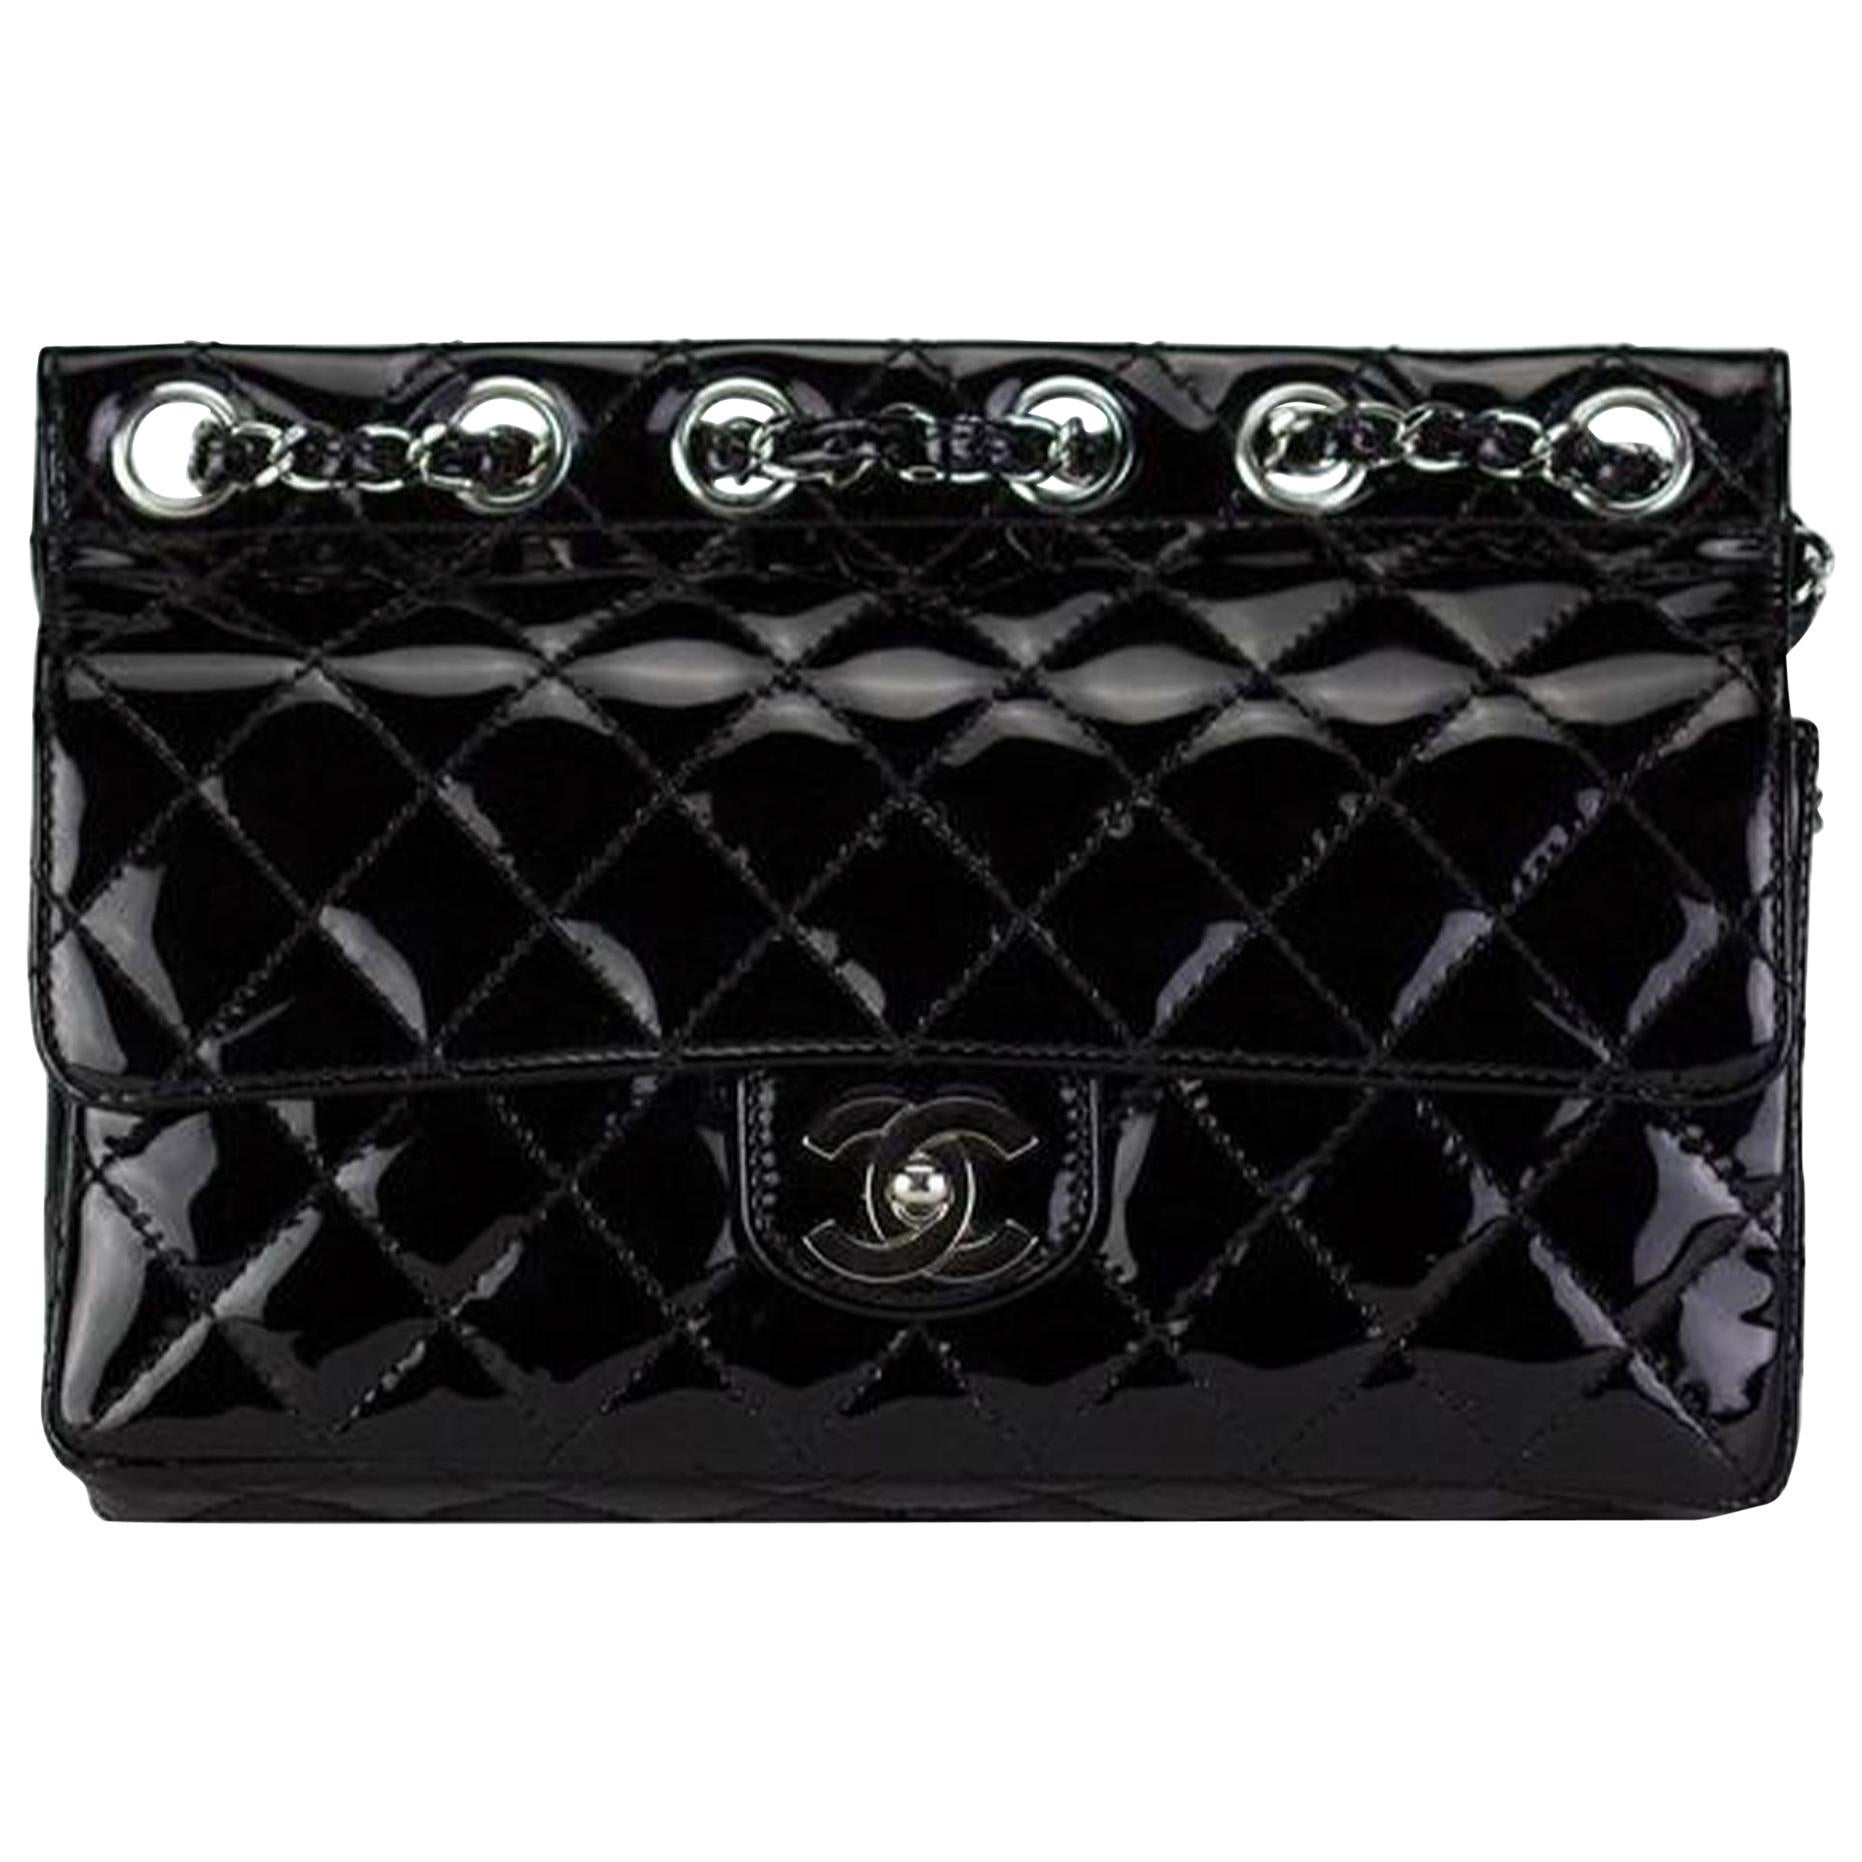 Chanel Classic Flap Supermodel Super Rare Quilted Black Patent Leather Bag